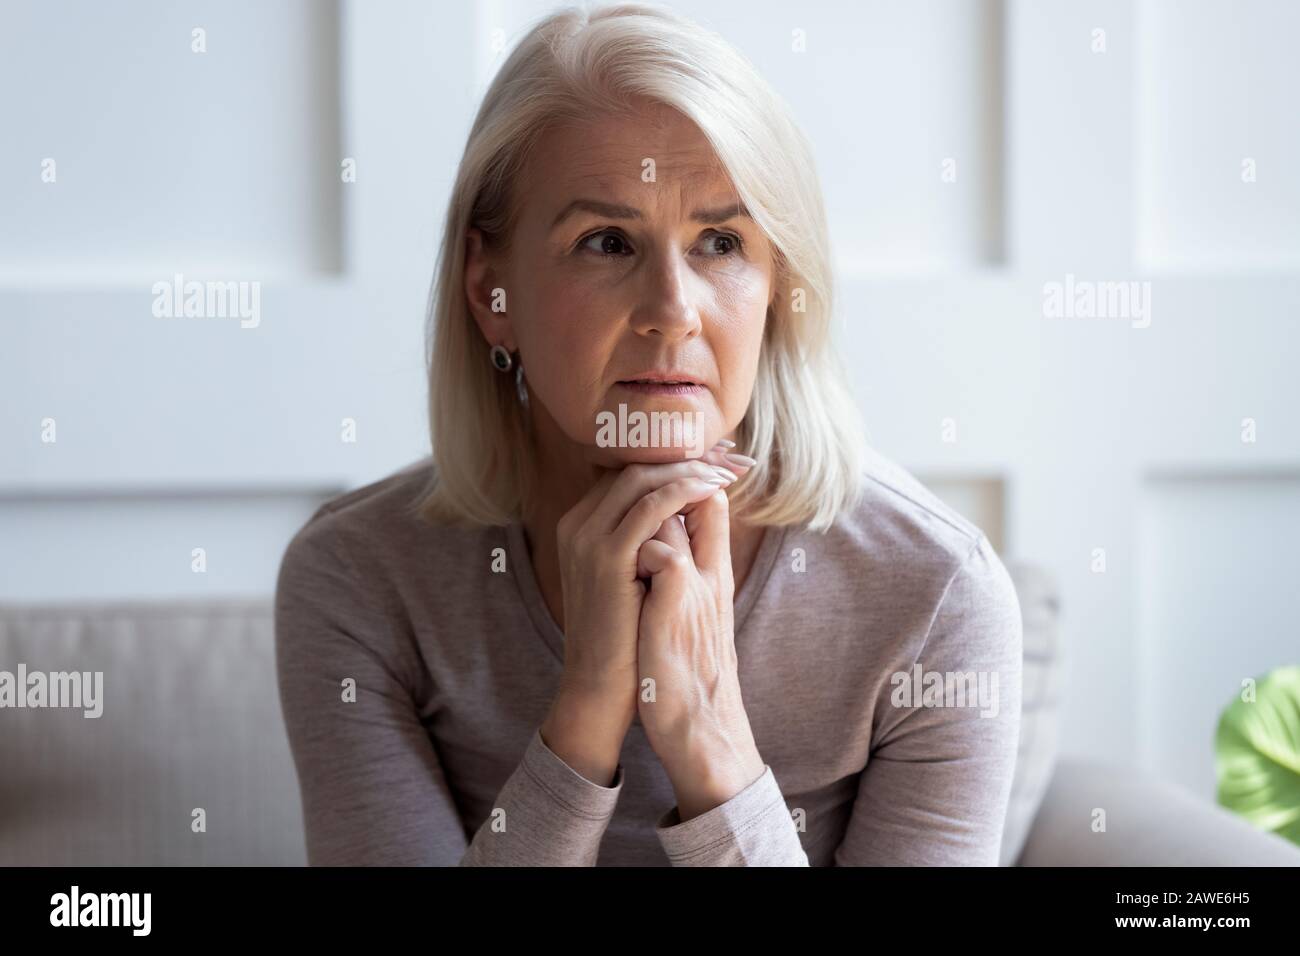 Sad senior woman look in distance thinking or mourning Stock Photo